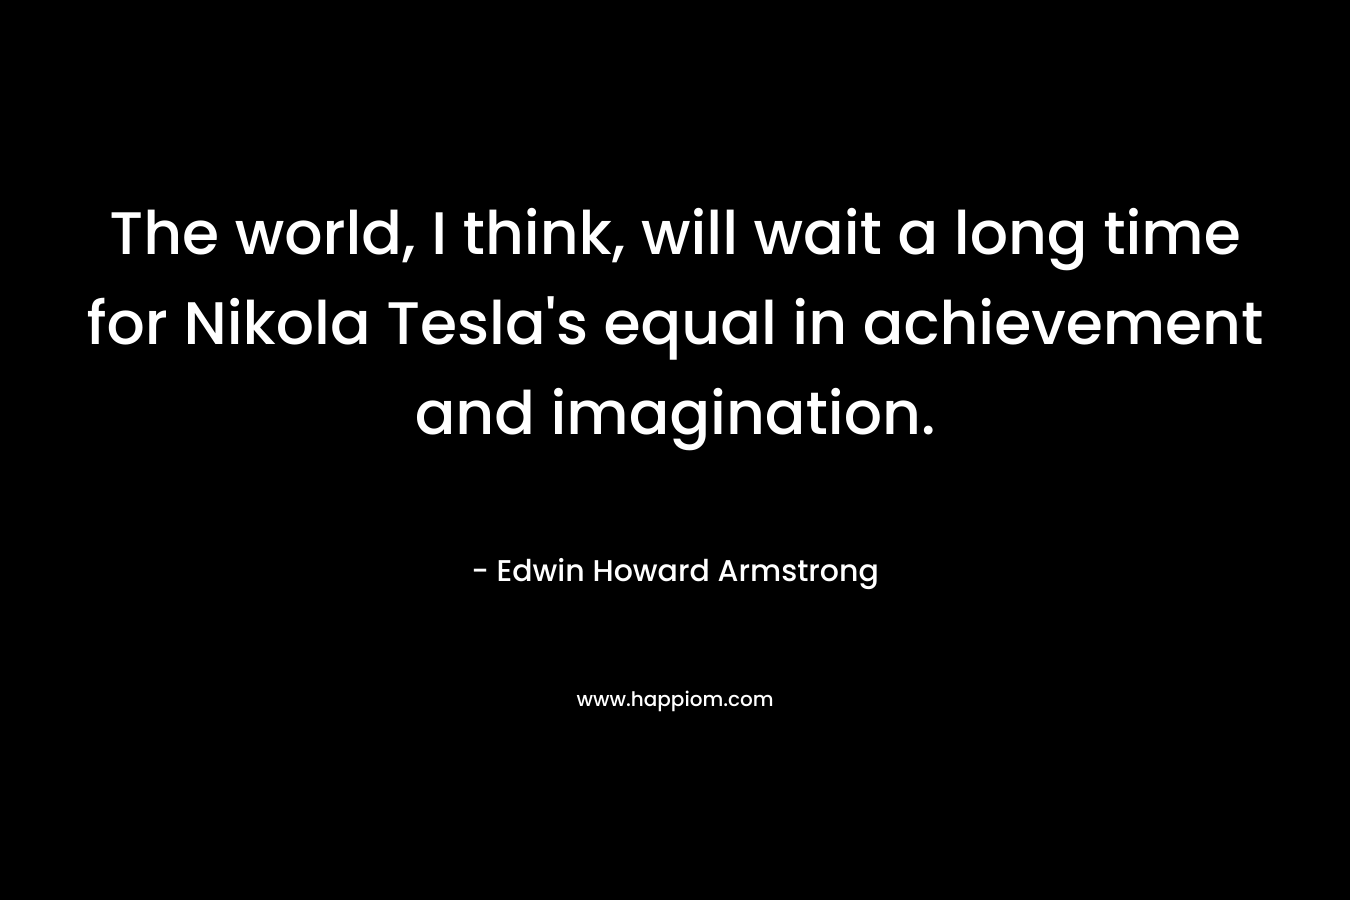 The world, I think, will wait a long time for Nikola Tesla's equal in achievement and imagination.